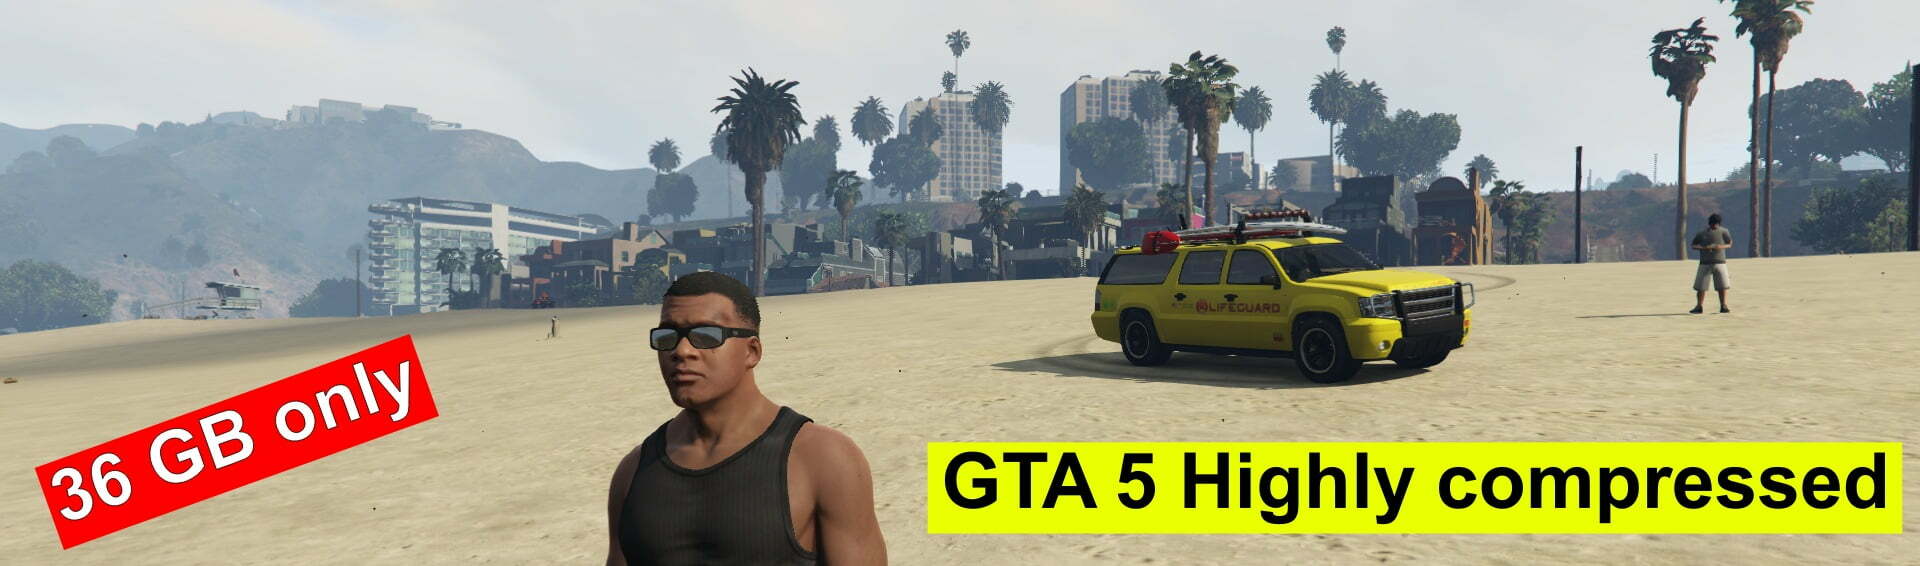 download gta 5 for windows 10 compressed